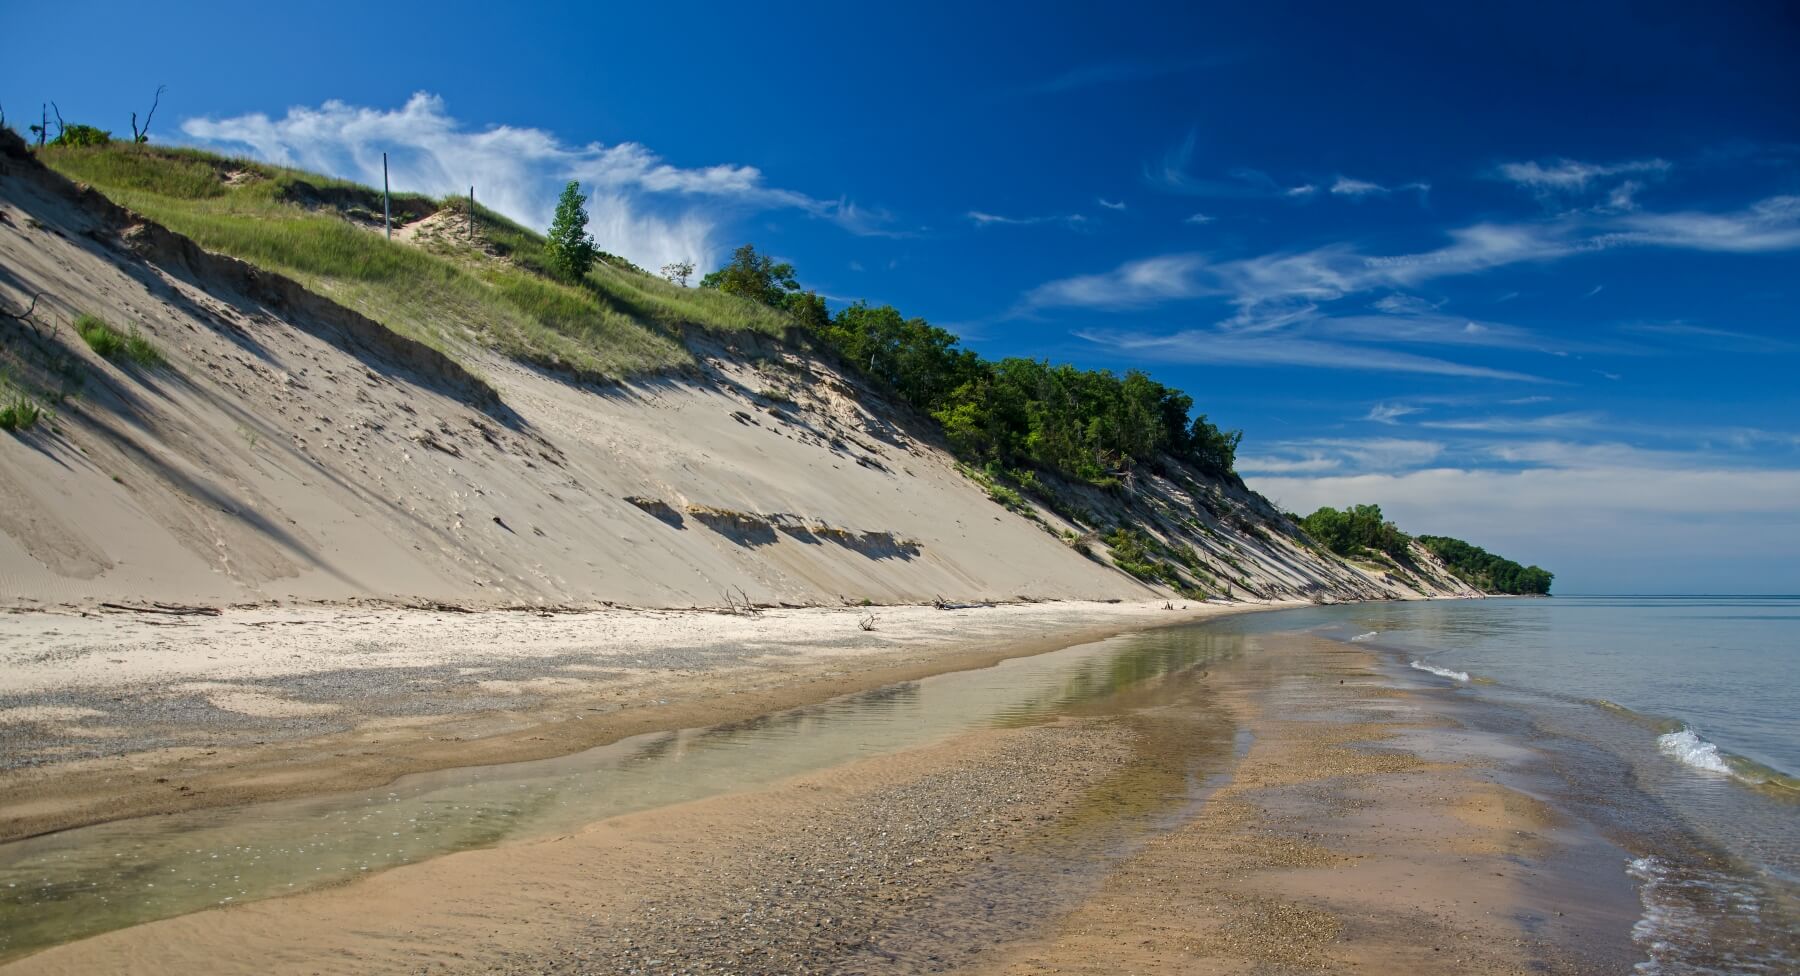 Knowles-Nelson Stewardship Program - sand dunes along Lake Michigan with a hilly dune rising to the left and covered in sand and green vegetation, running into the brown shallow water of the lake on the right.